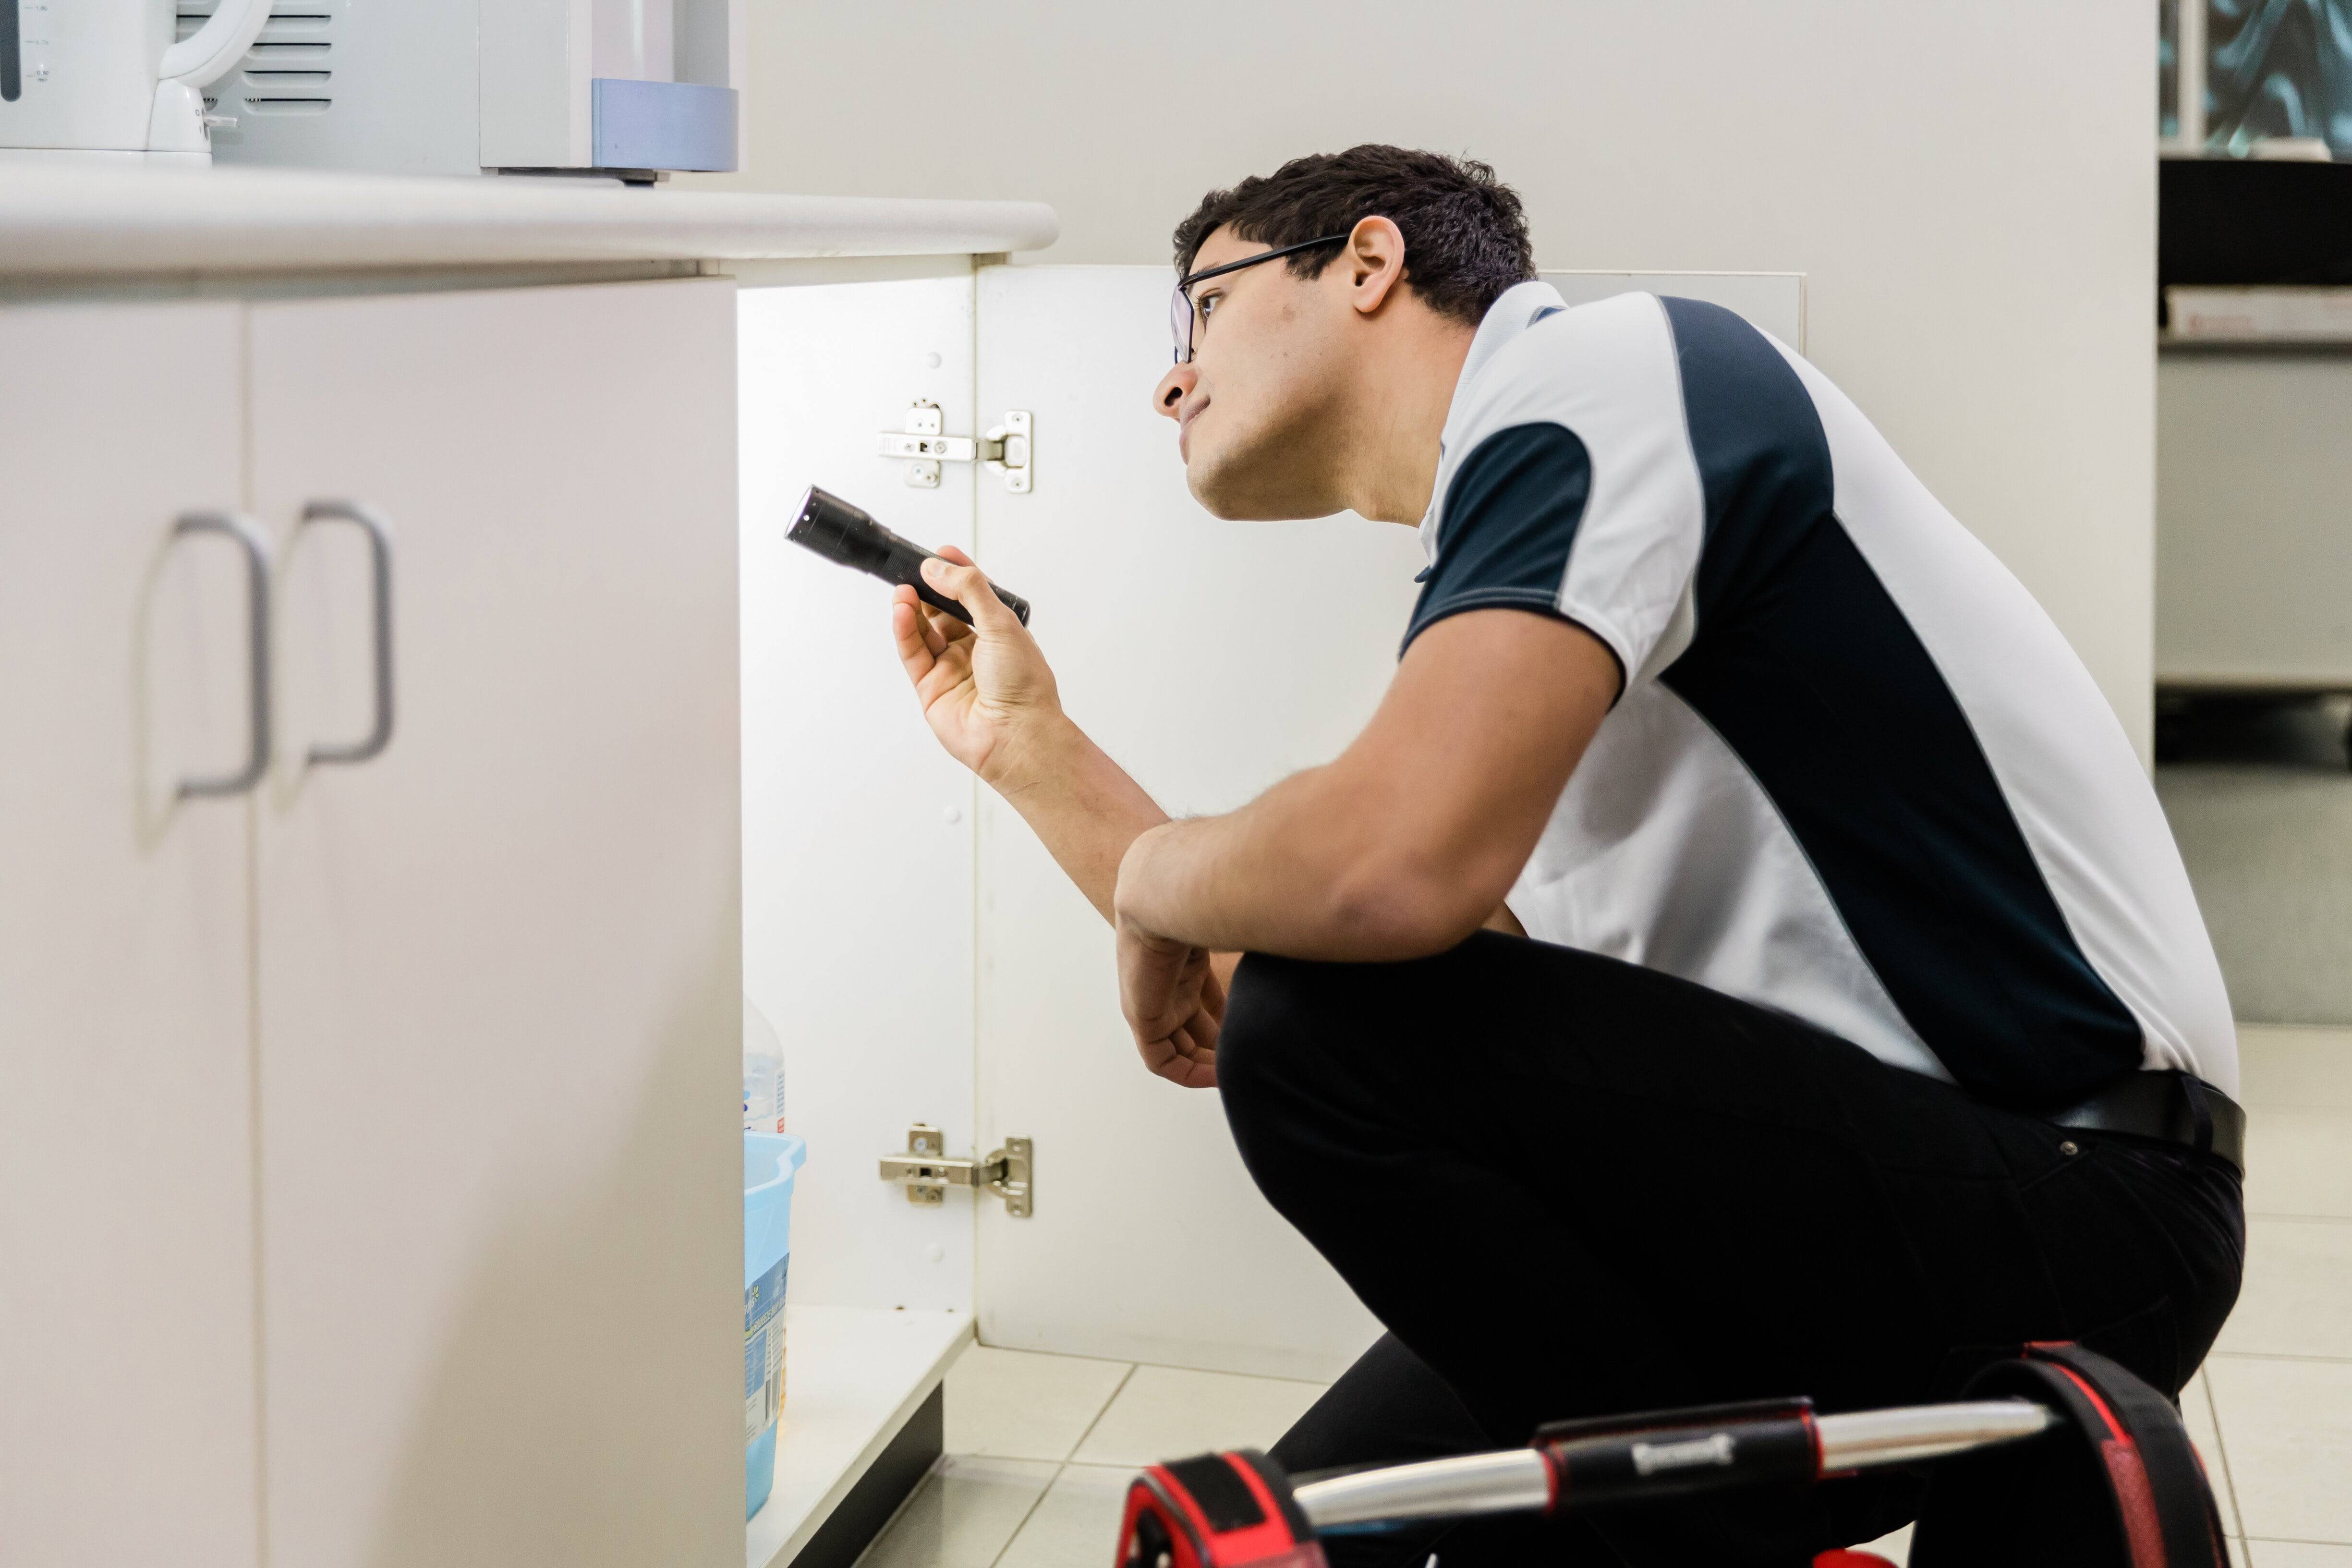 safe Pest control technician carrying out pest inspection in a kitchen